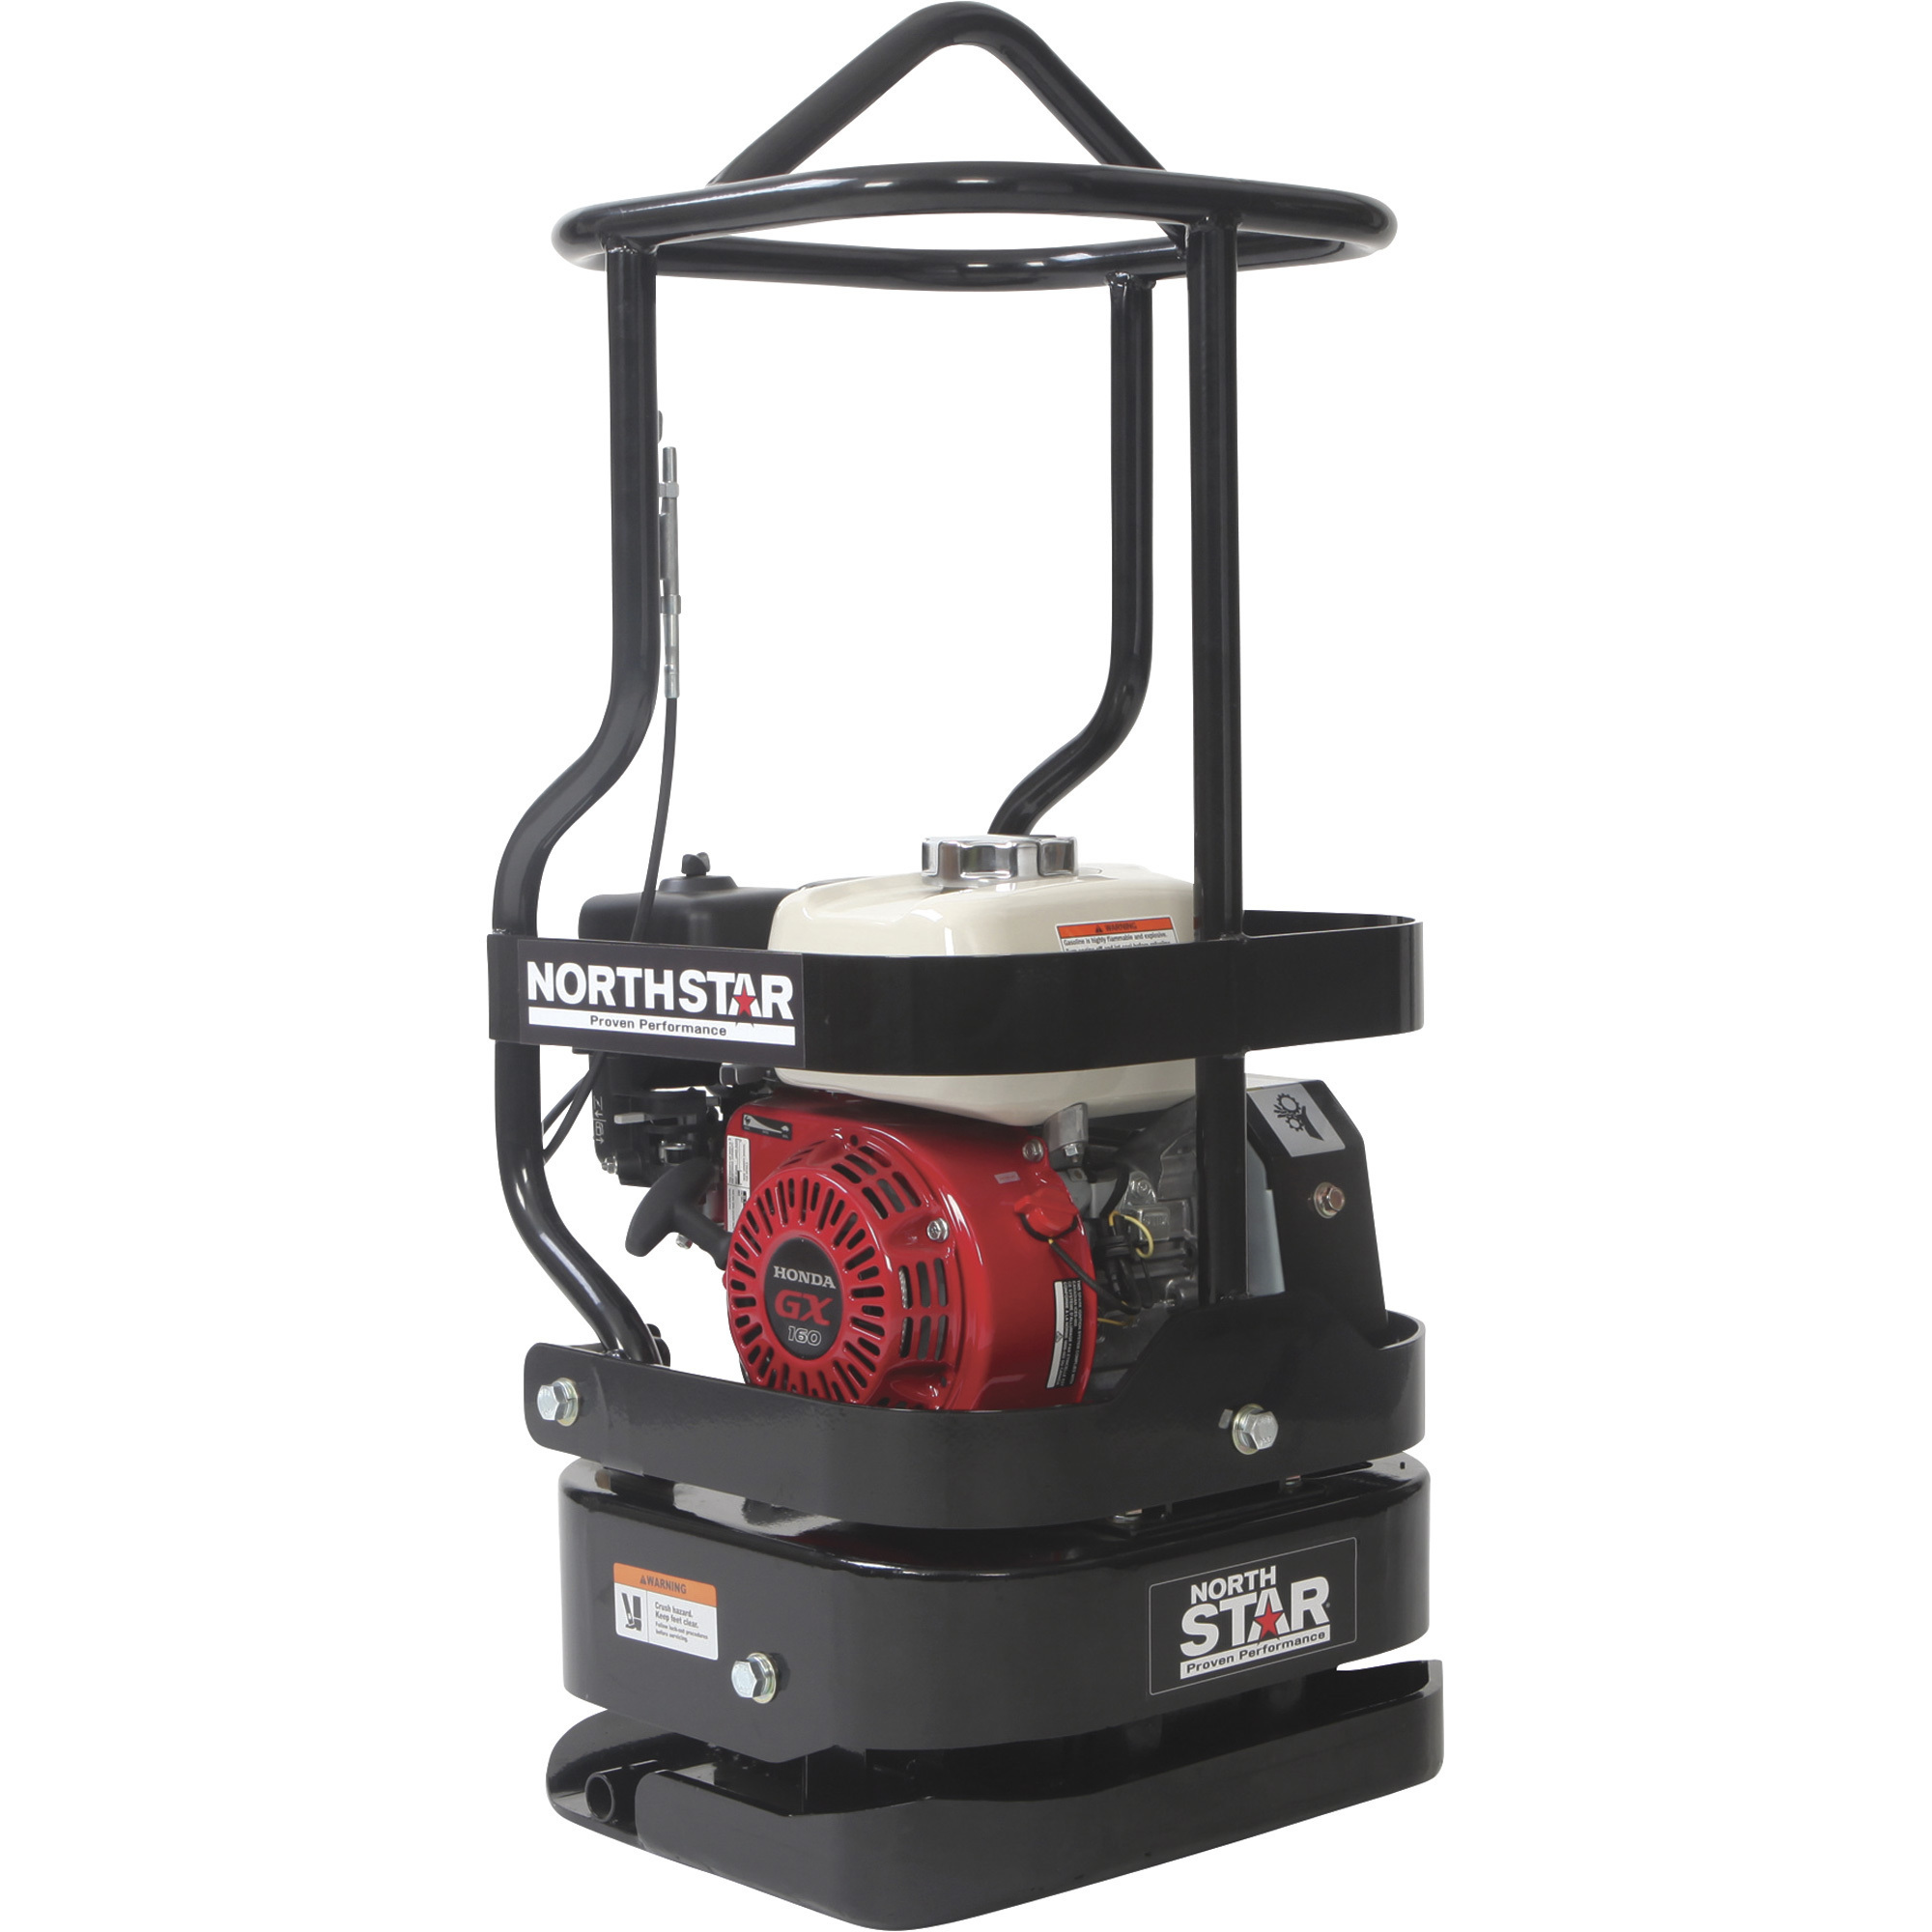 NorthStar Tamping Rammer Plate Compactor â With 5.5 HP Honda GX160 Engine